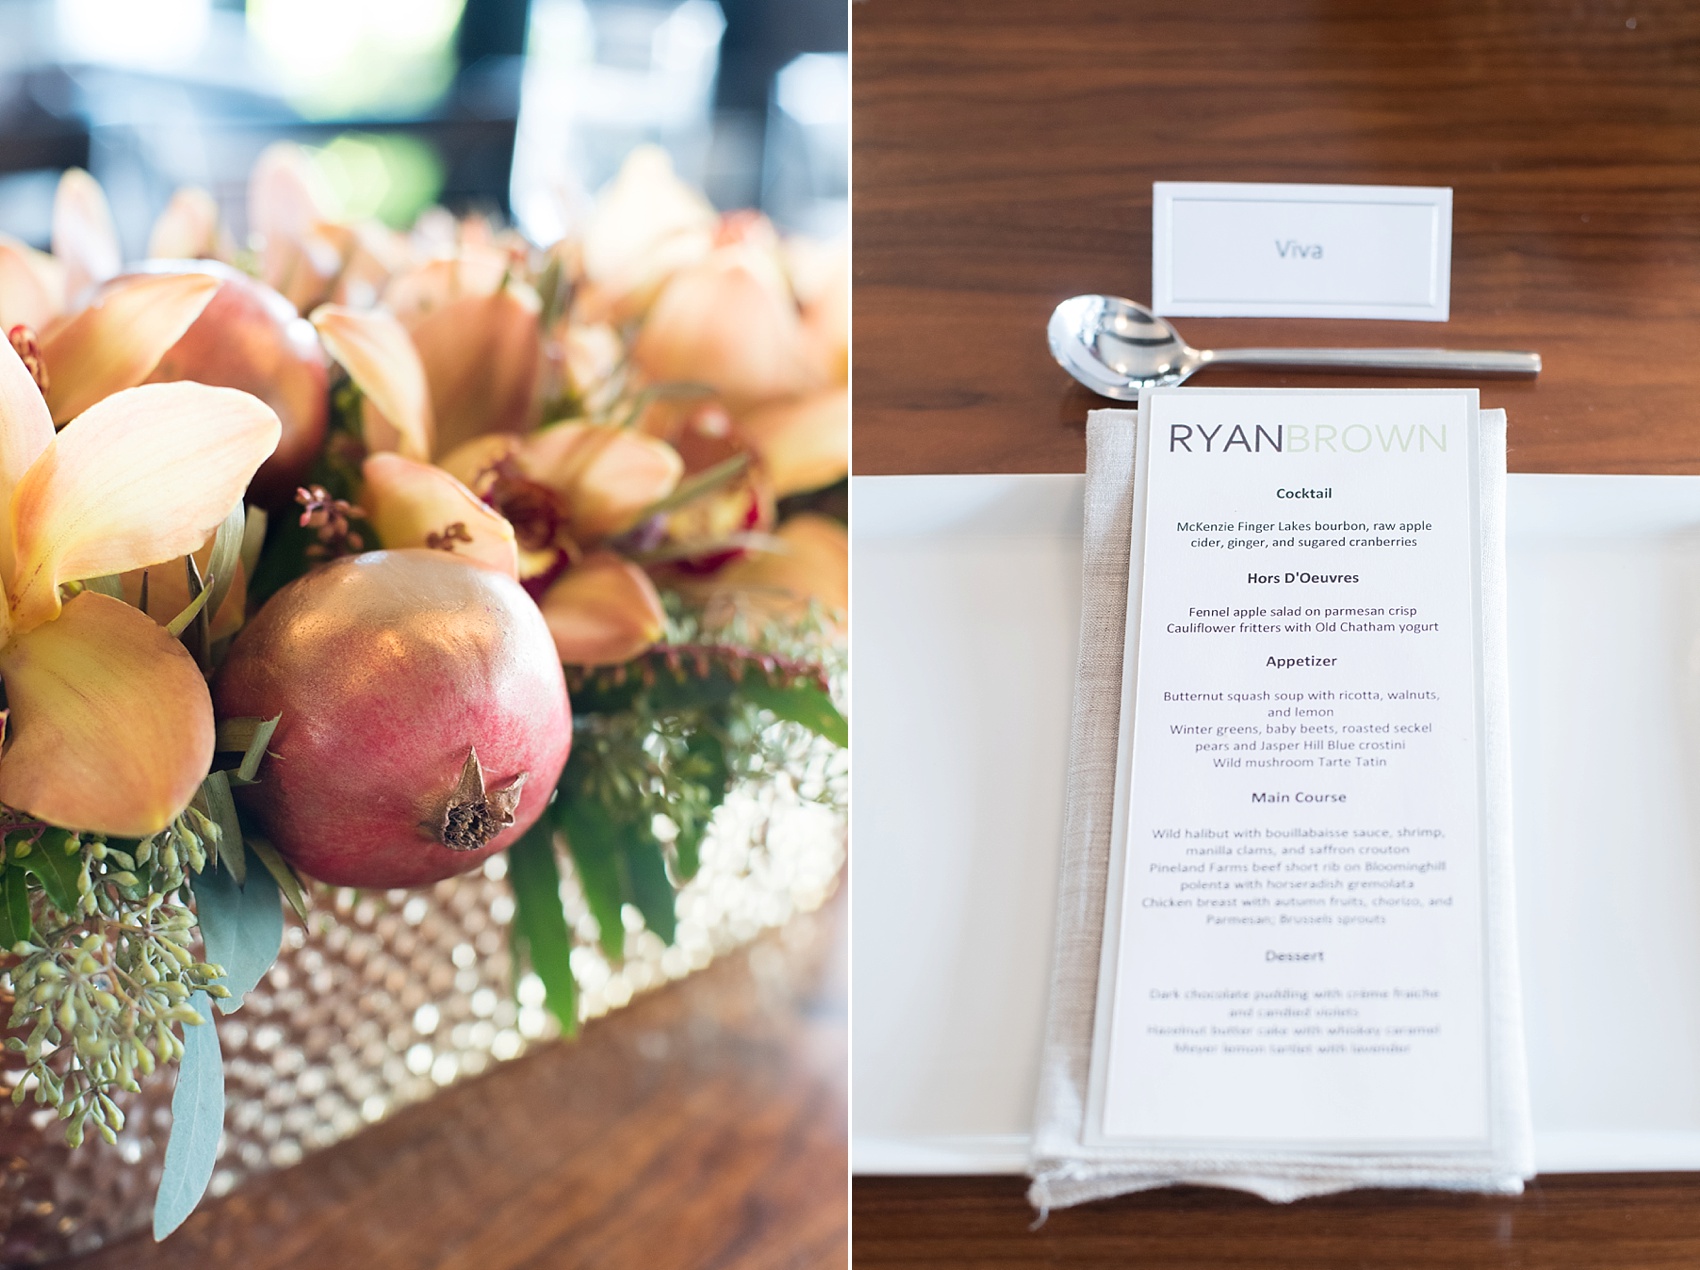 Photo by Mikkel Paige, Brooklyn wedding photographer. Flowers by The Arrangement NYC fall and autumn orchid ombre centerpieces at 501 Union with Ryan Brown catering.